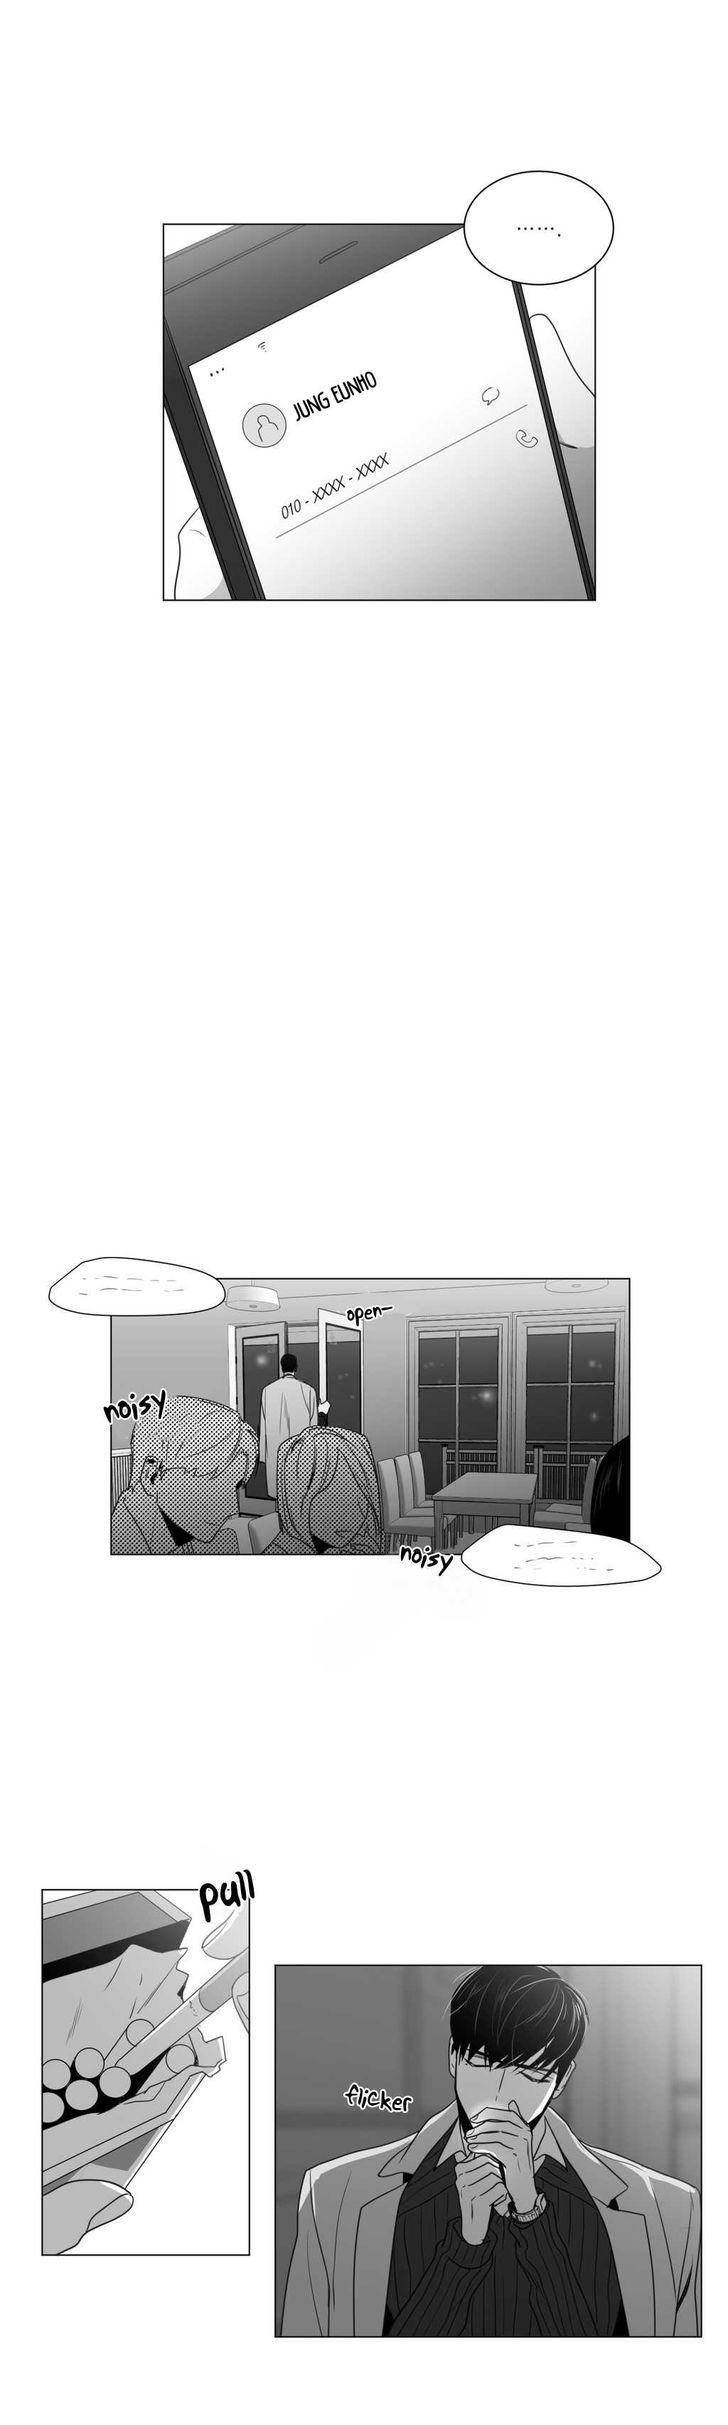 Lover Boy (Lezhin) Chapter 027 page 8